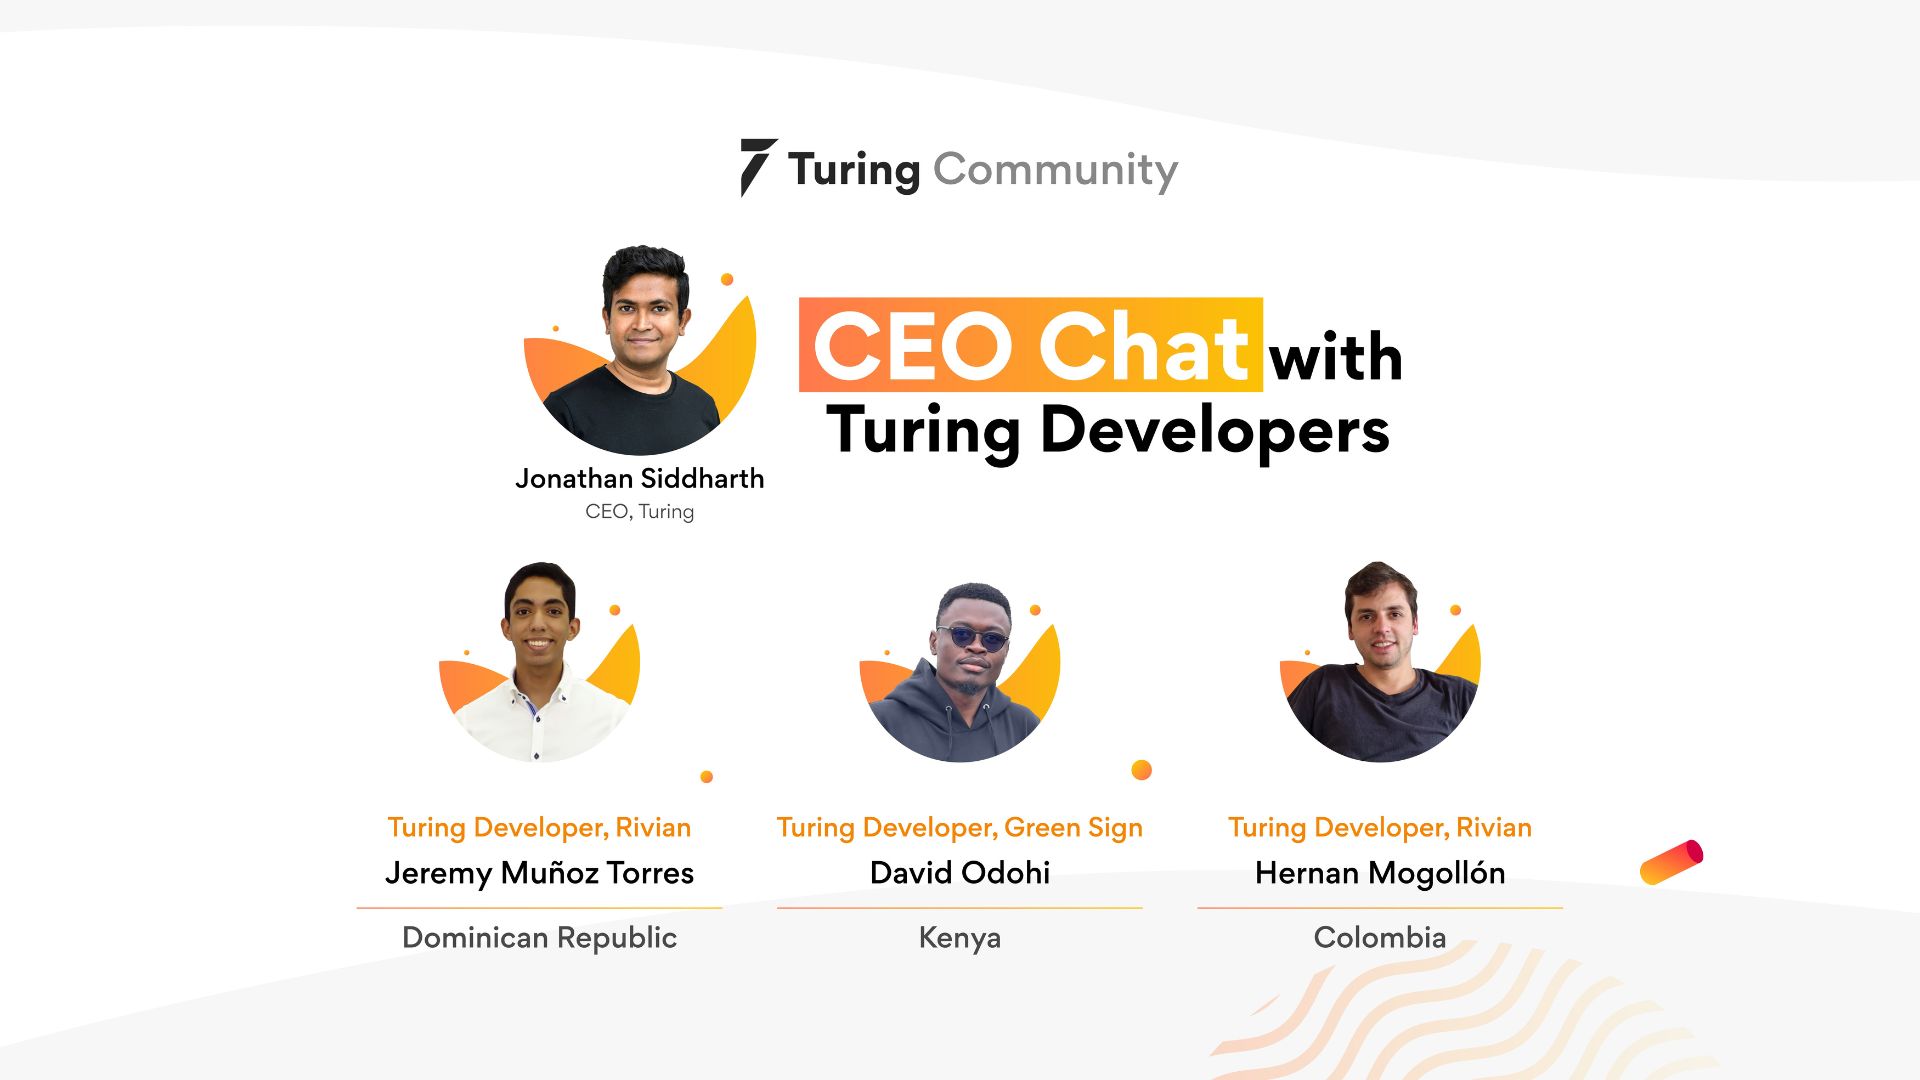 Turing.com Announces CEO Chat with Turing Developers